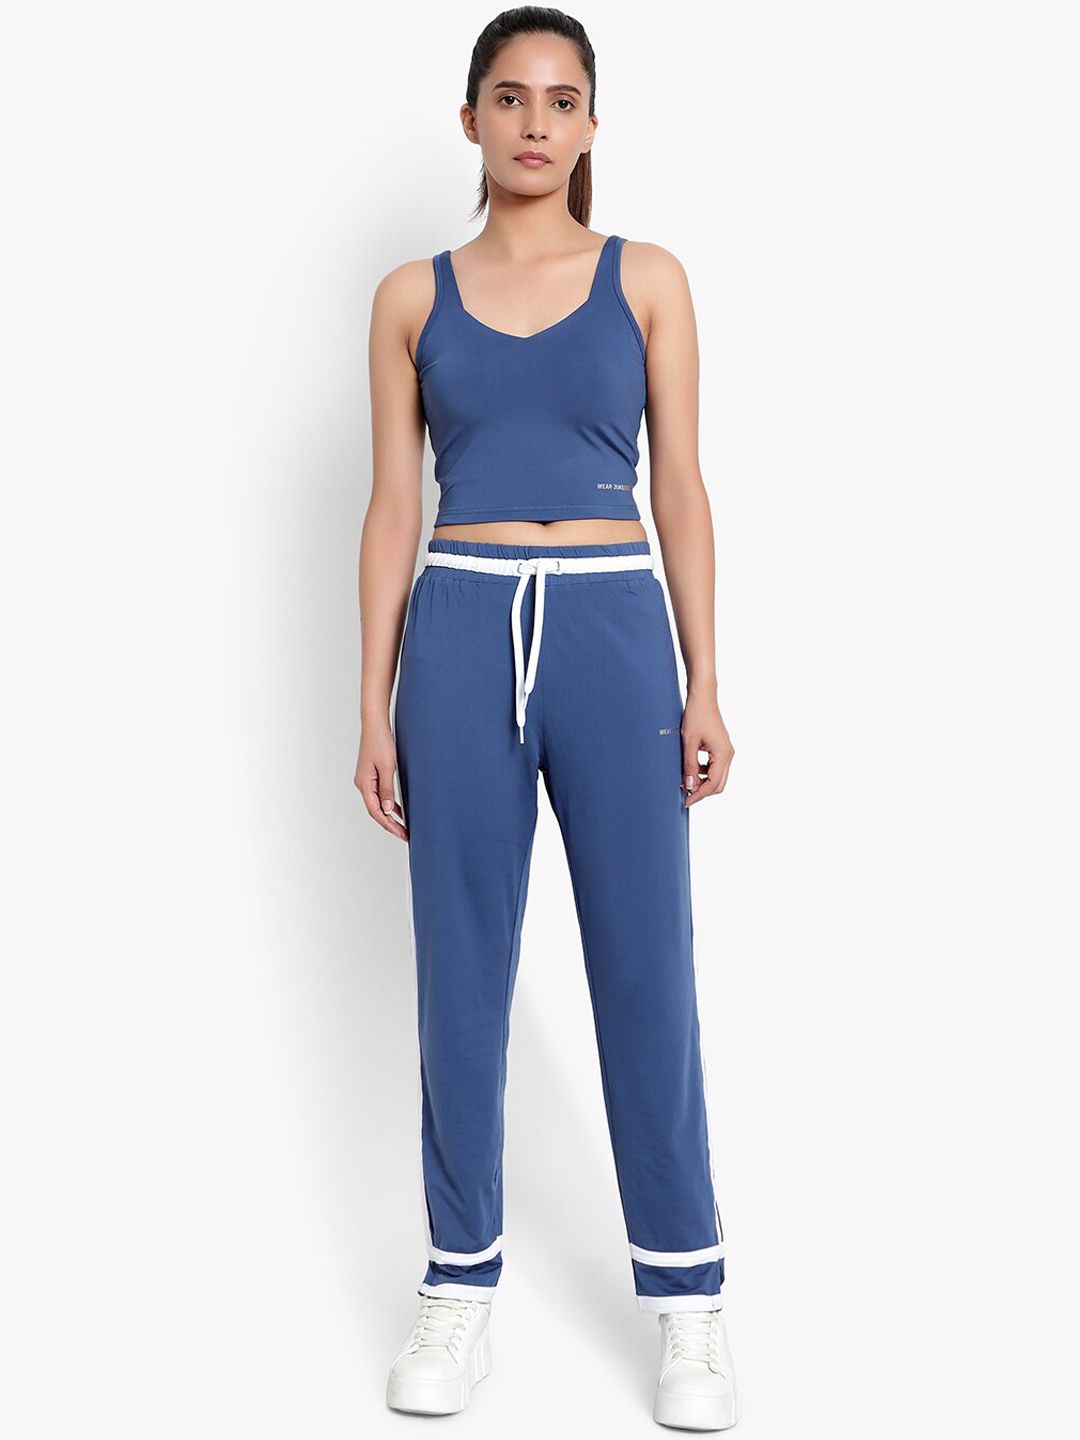 Wearjukebox Women Blue Solid Tracksuit Price in India